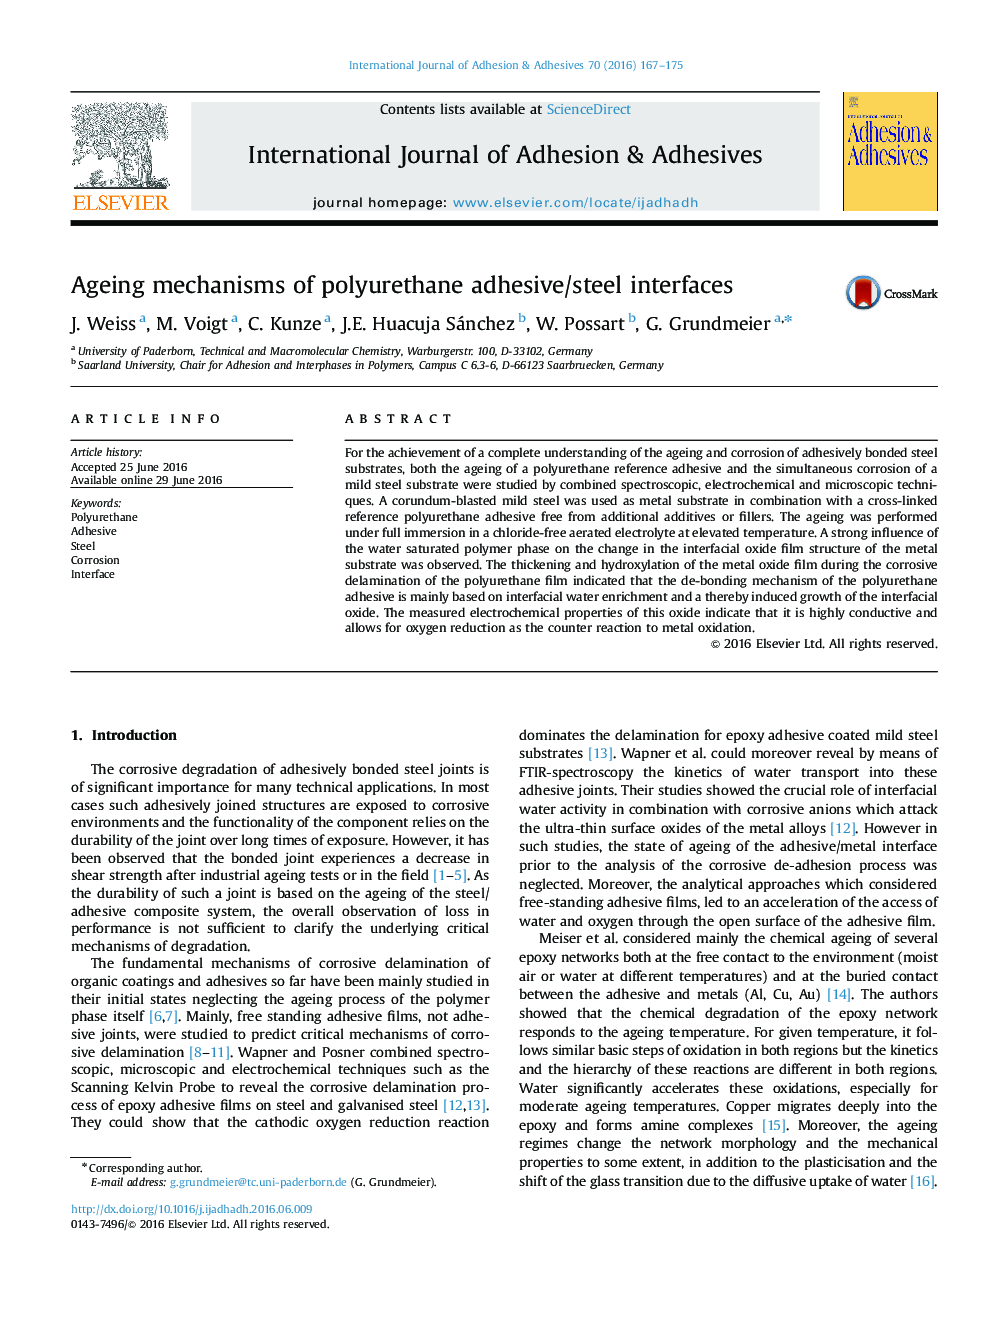 Ageing mechanisms of polyurethane adhesive/steel interfaces